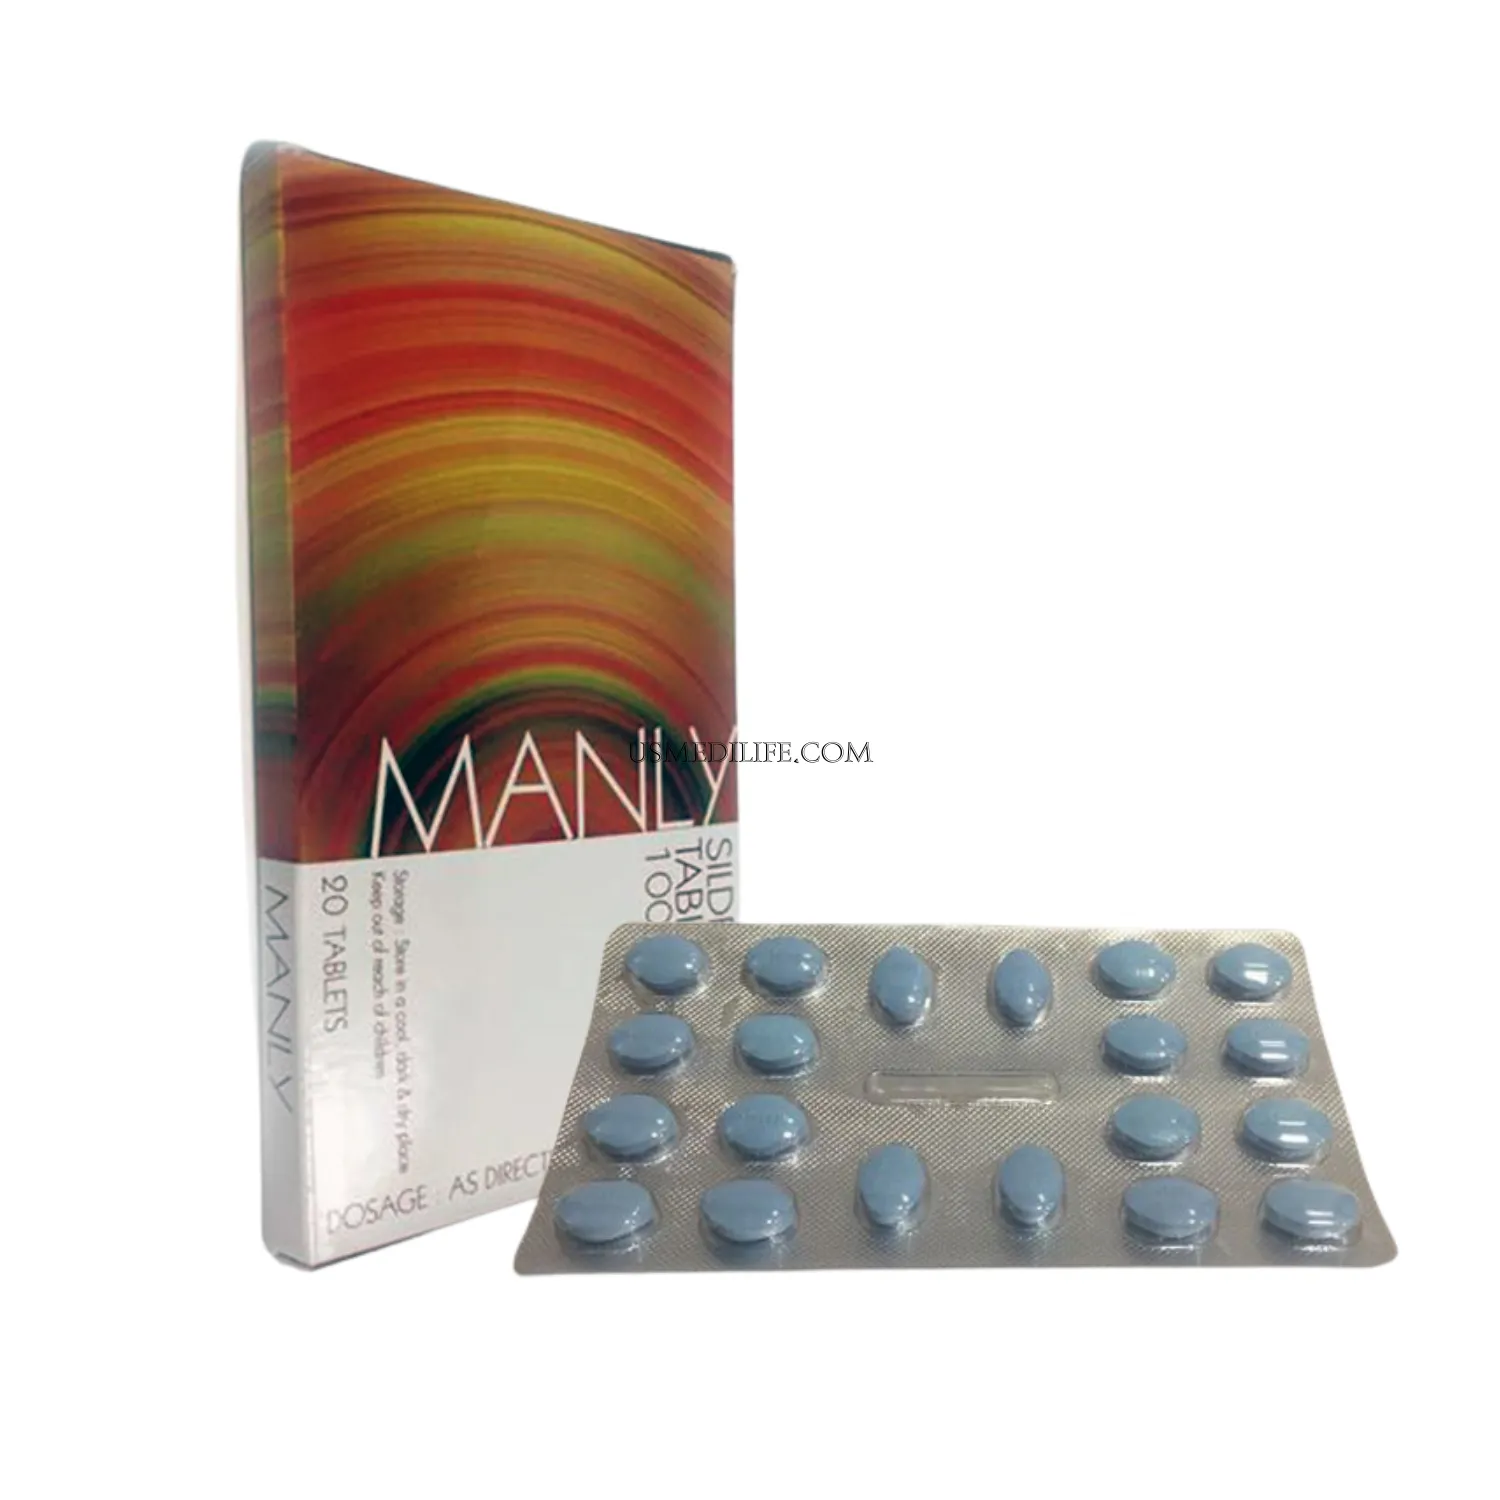 Manly 100mg Image